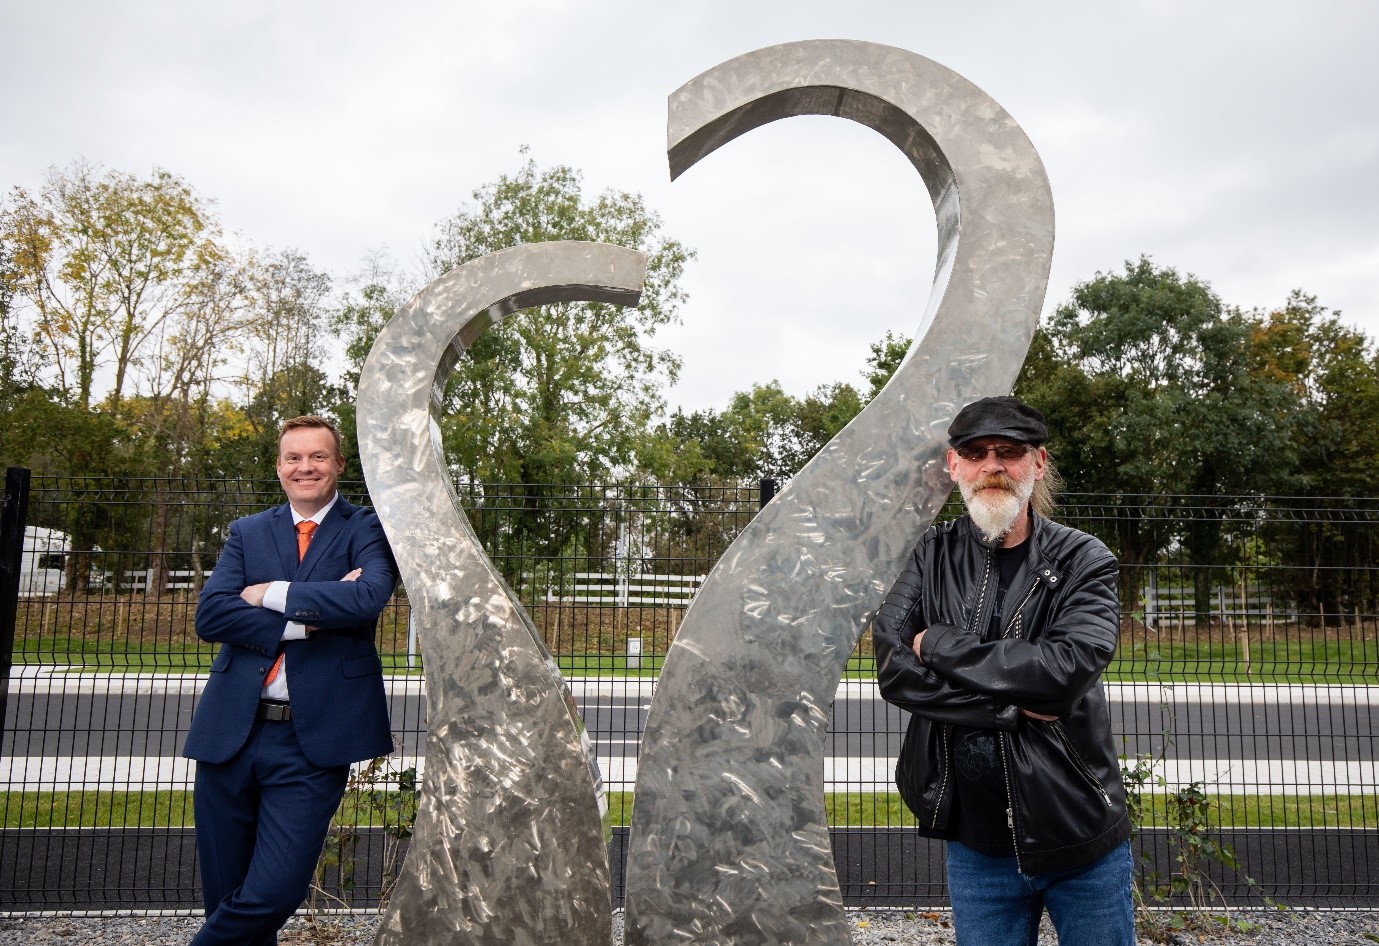 JJ Hegarty - The sculpture consists of two stainless steel pieces of work placed together to create a heart.